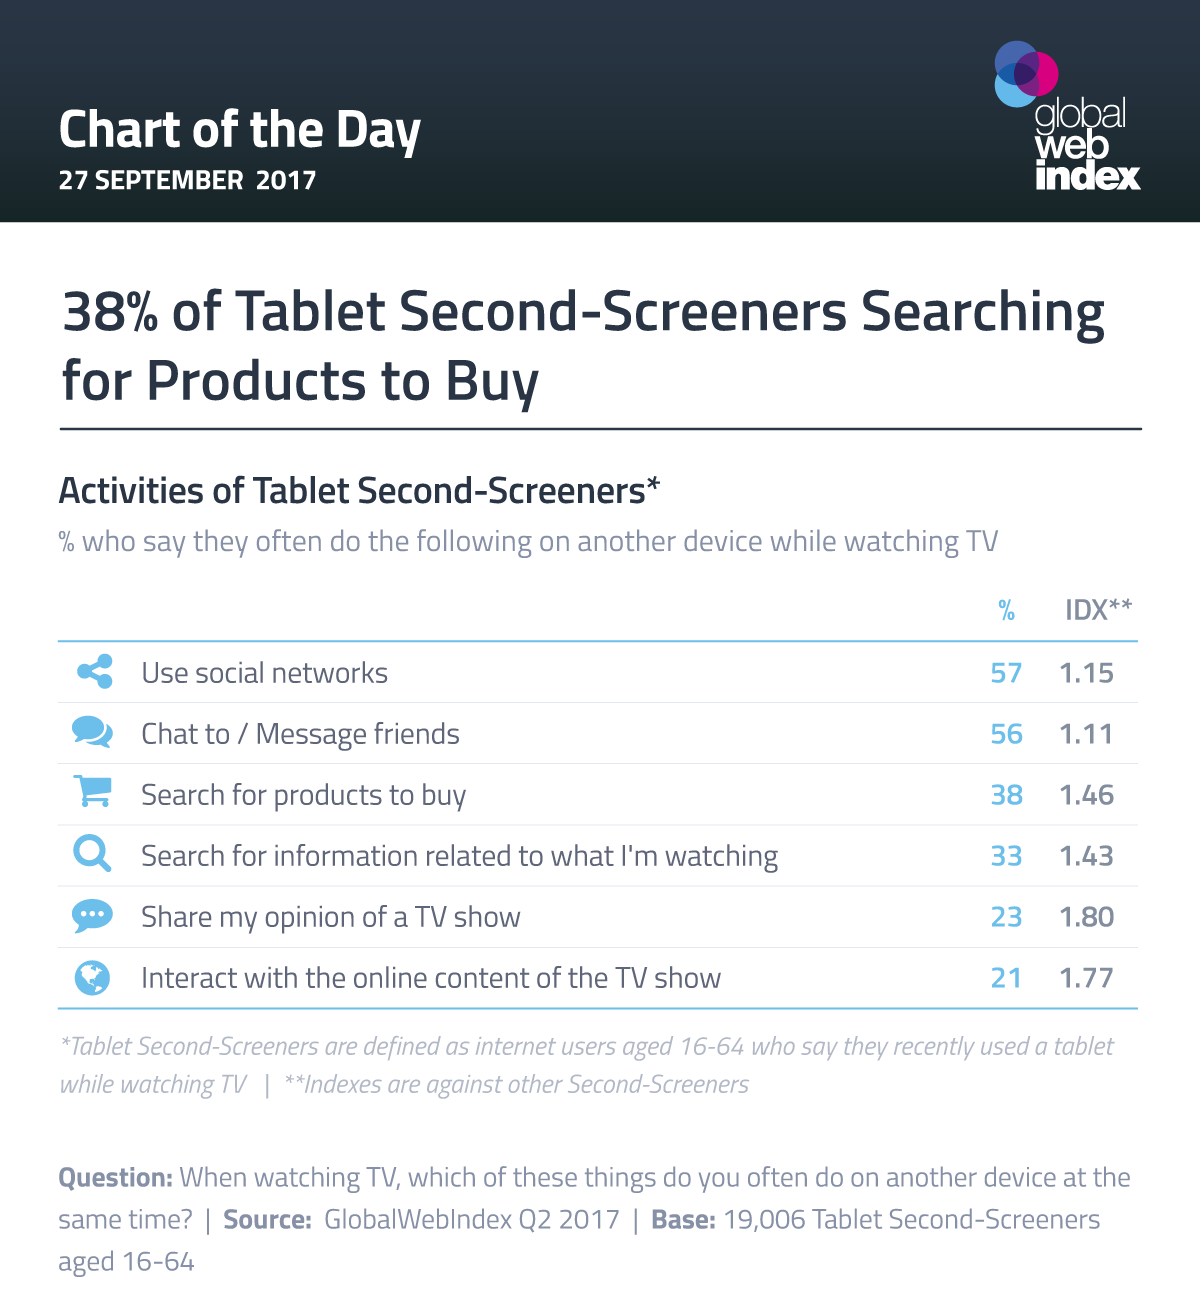 38% of Tablet Second-Screeners Searching for Products to Buy